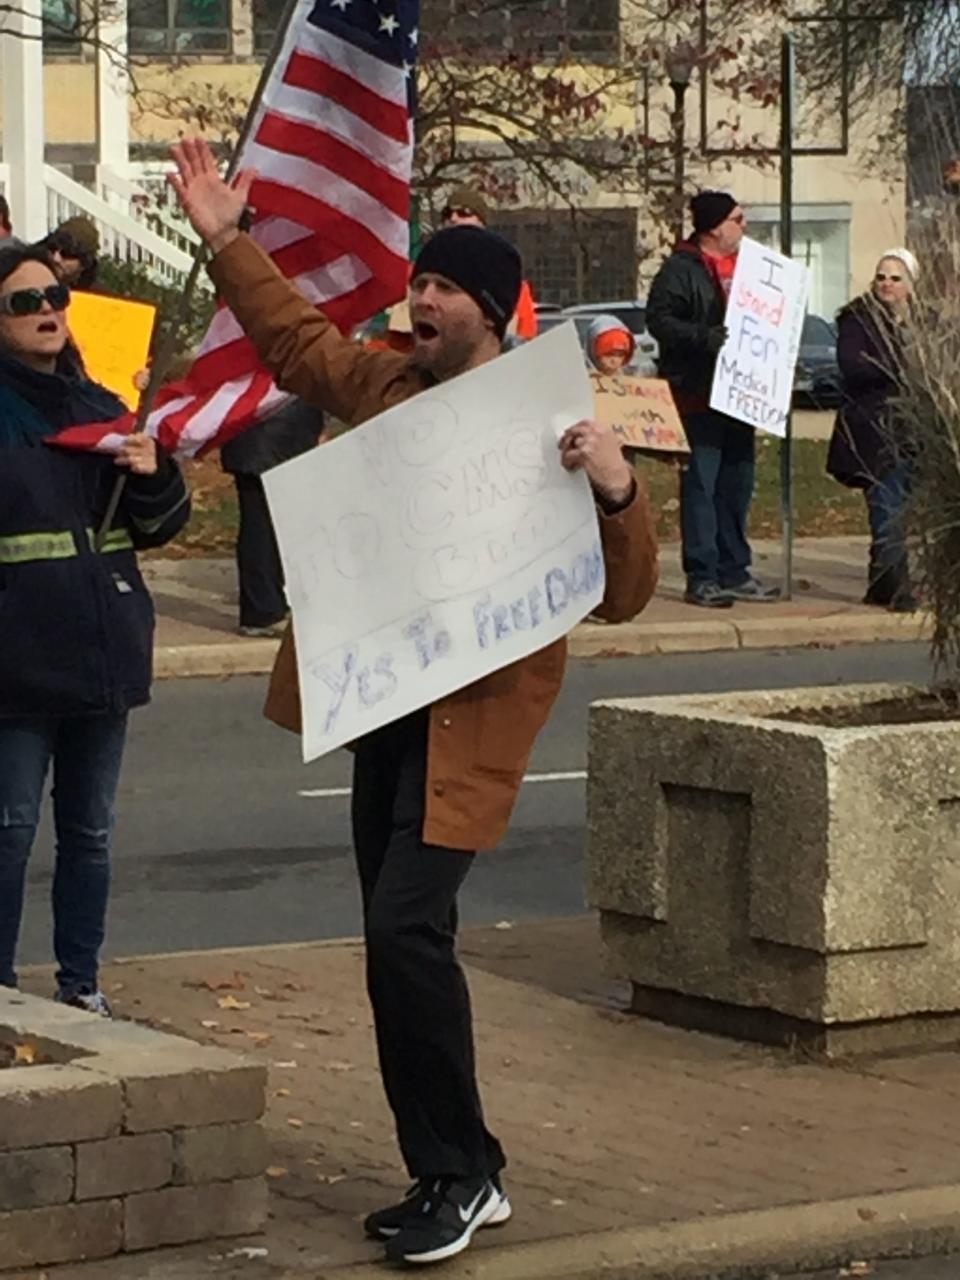 A man exhorts the crowd at Saturday's protest of vaccination mandates.